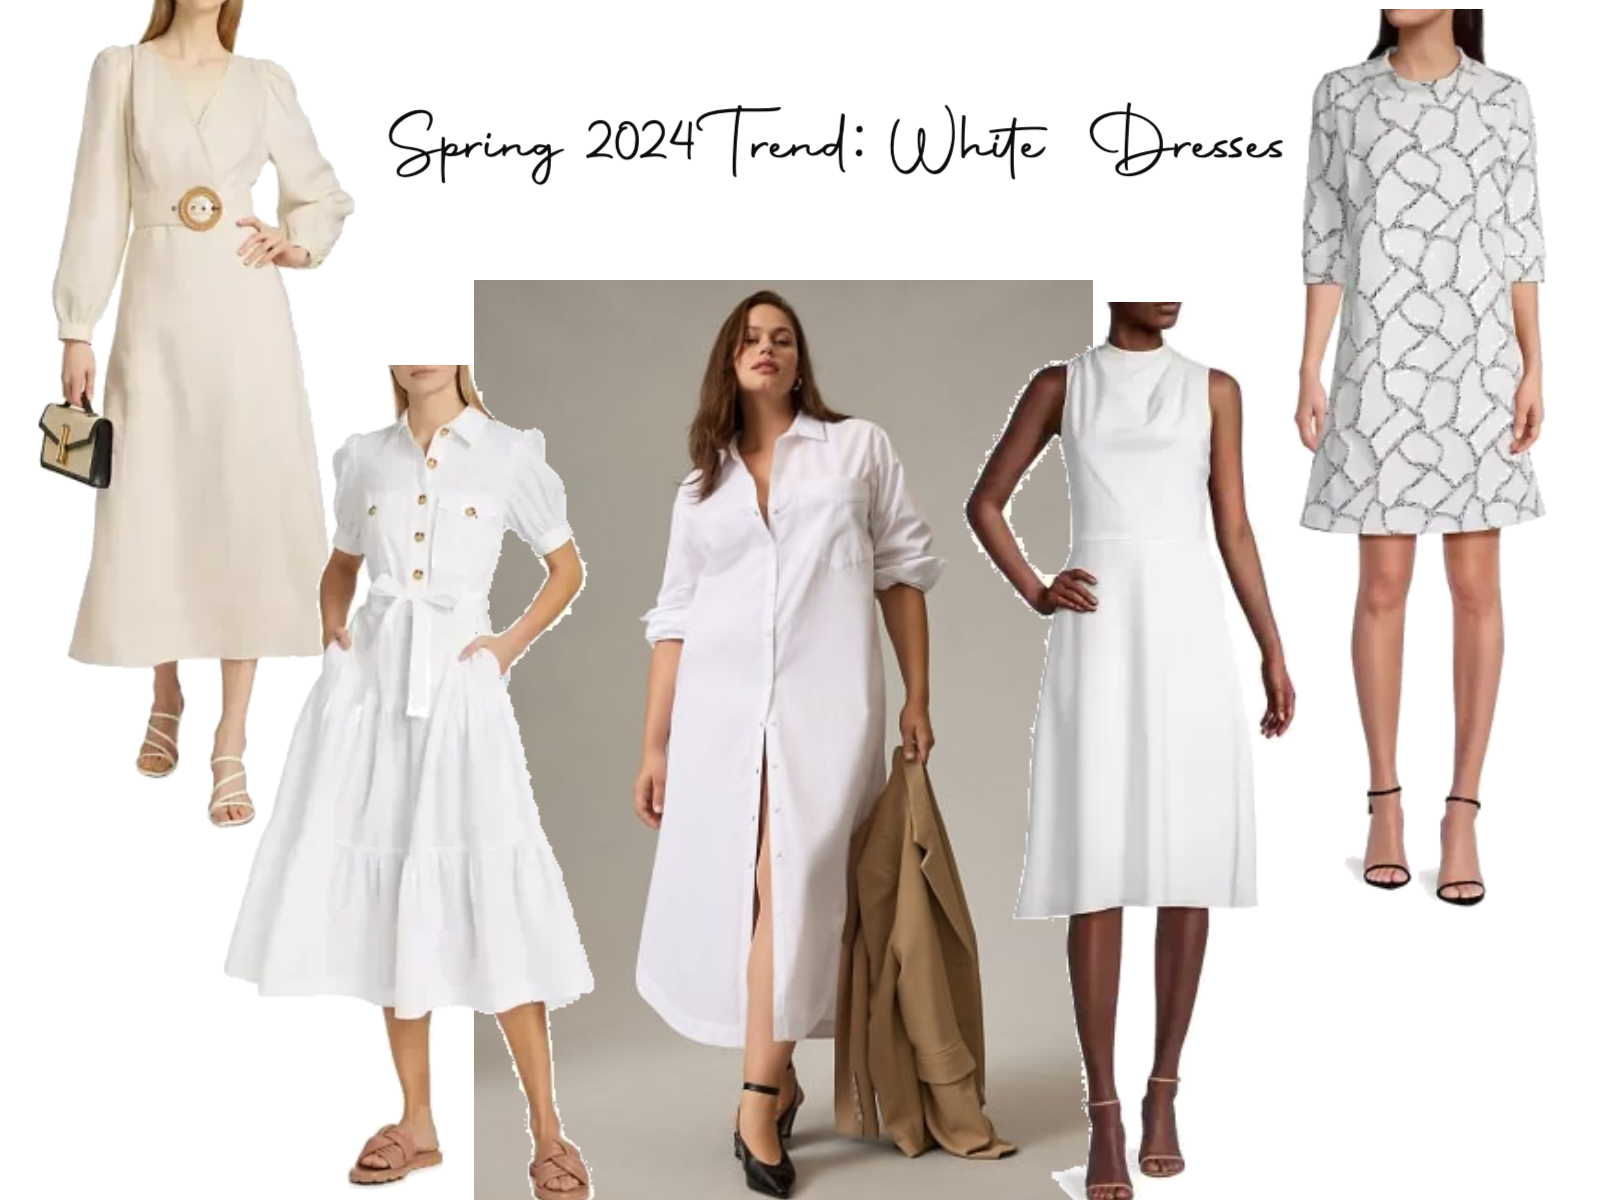 A shoppable outfit board showing the wearable spring trend, white dresses. 